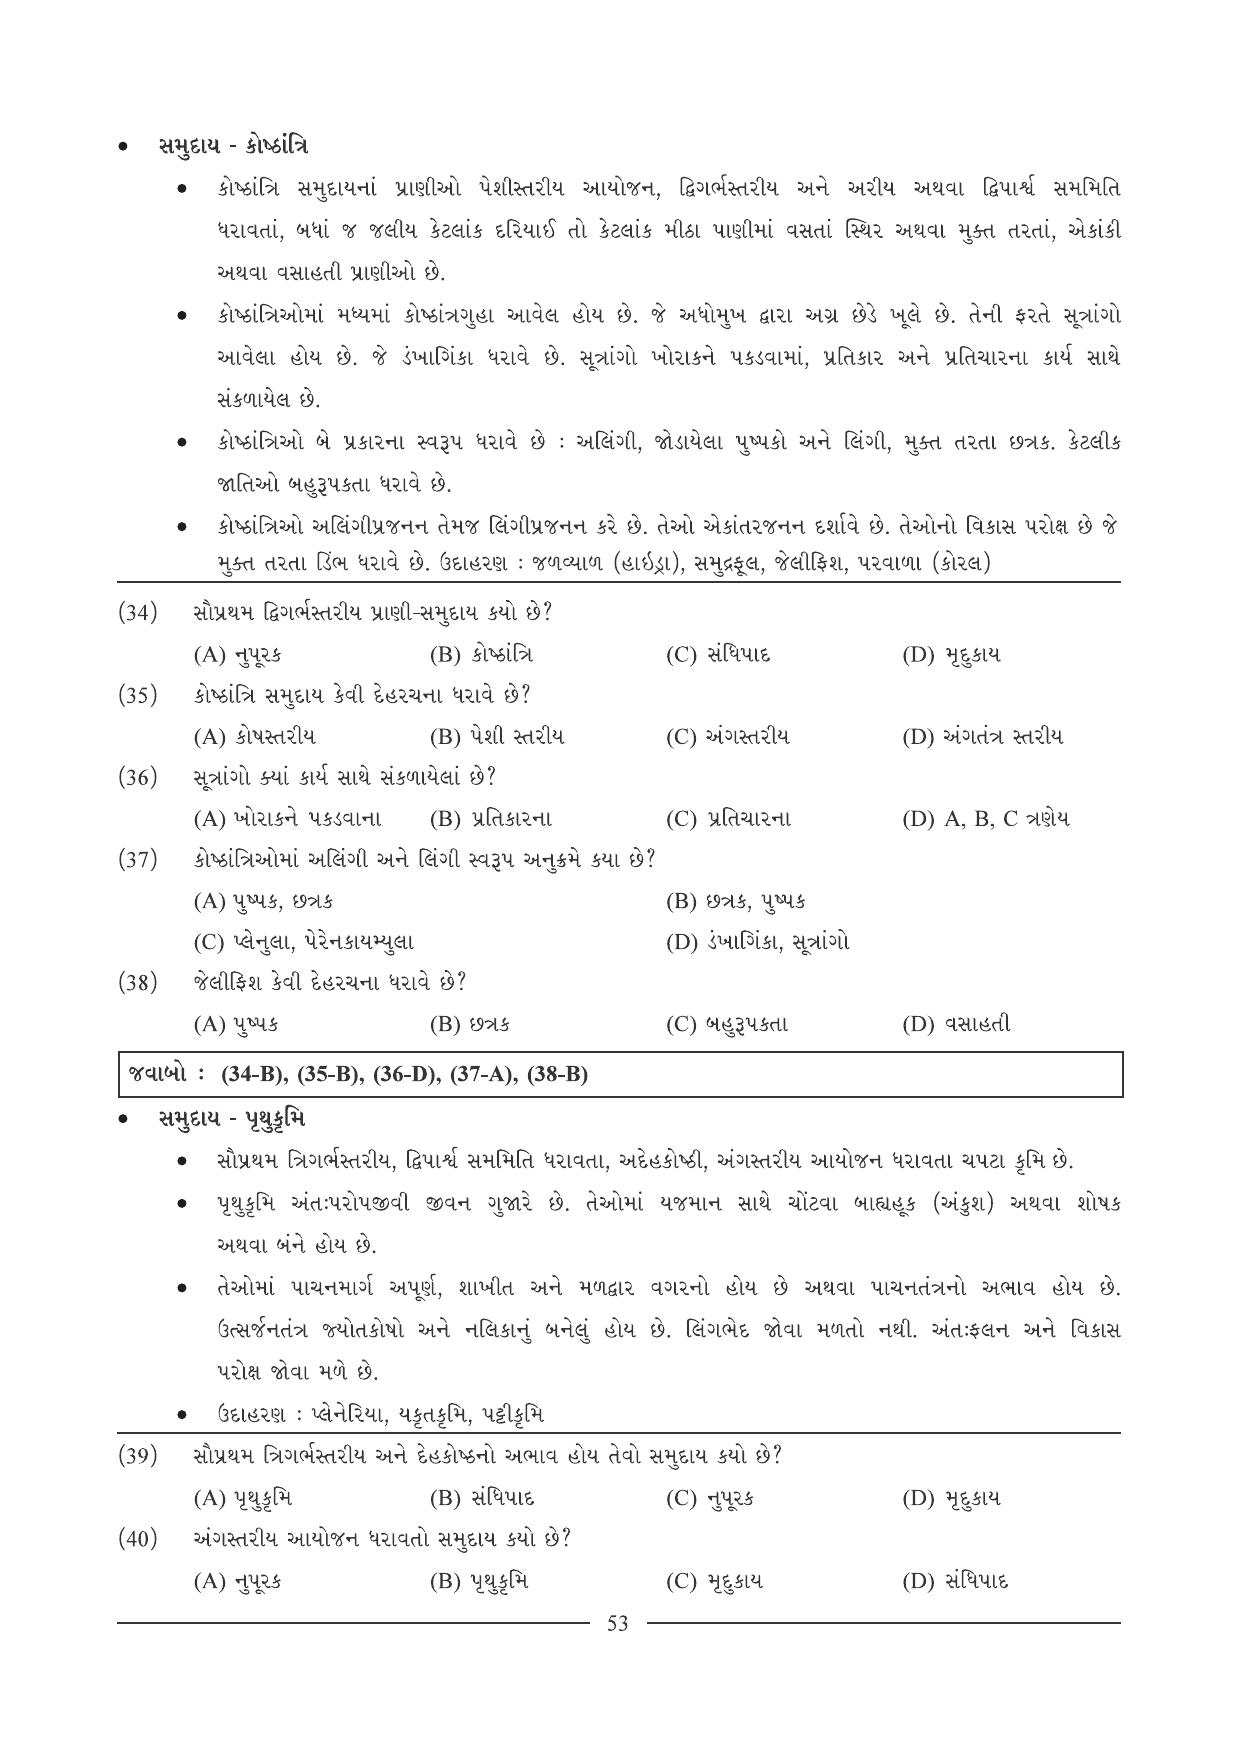 GSEB HSC Biology Question Paper (Gujarati Medium)- Chapter 4 - Page 6